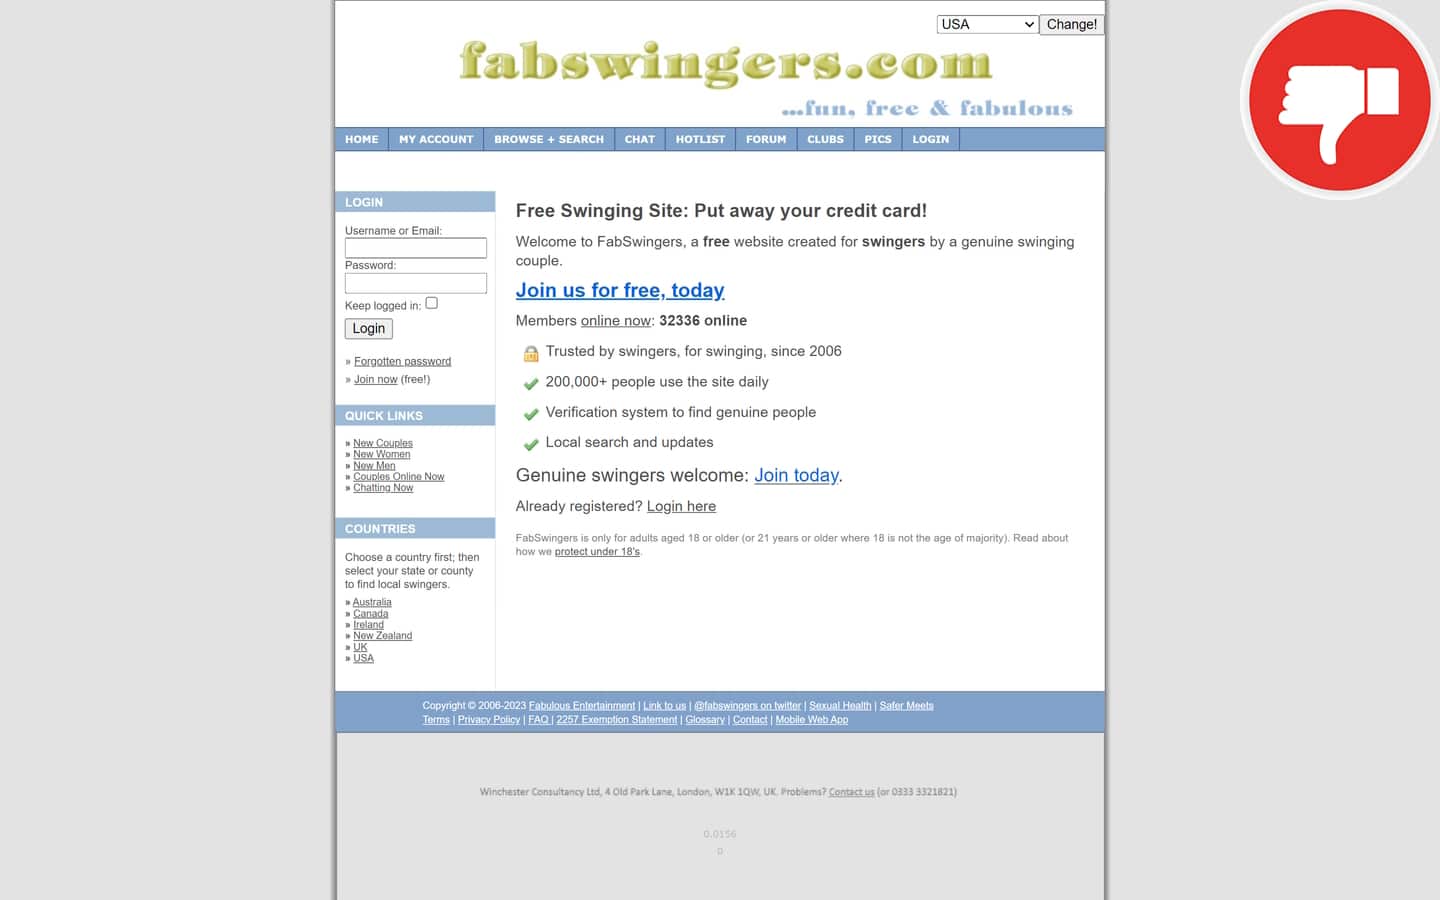 Review FabSwingers.com scam experience